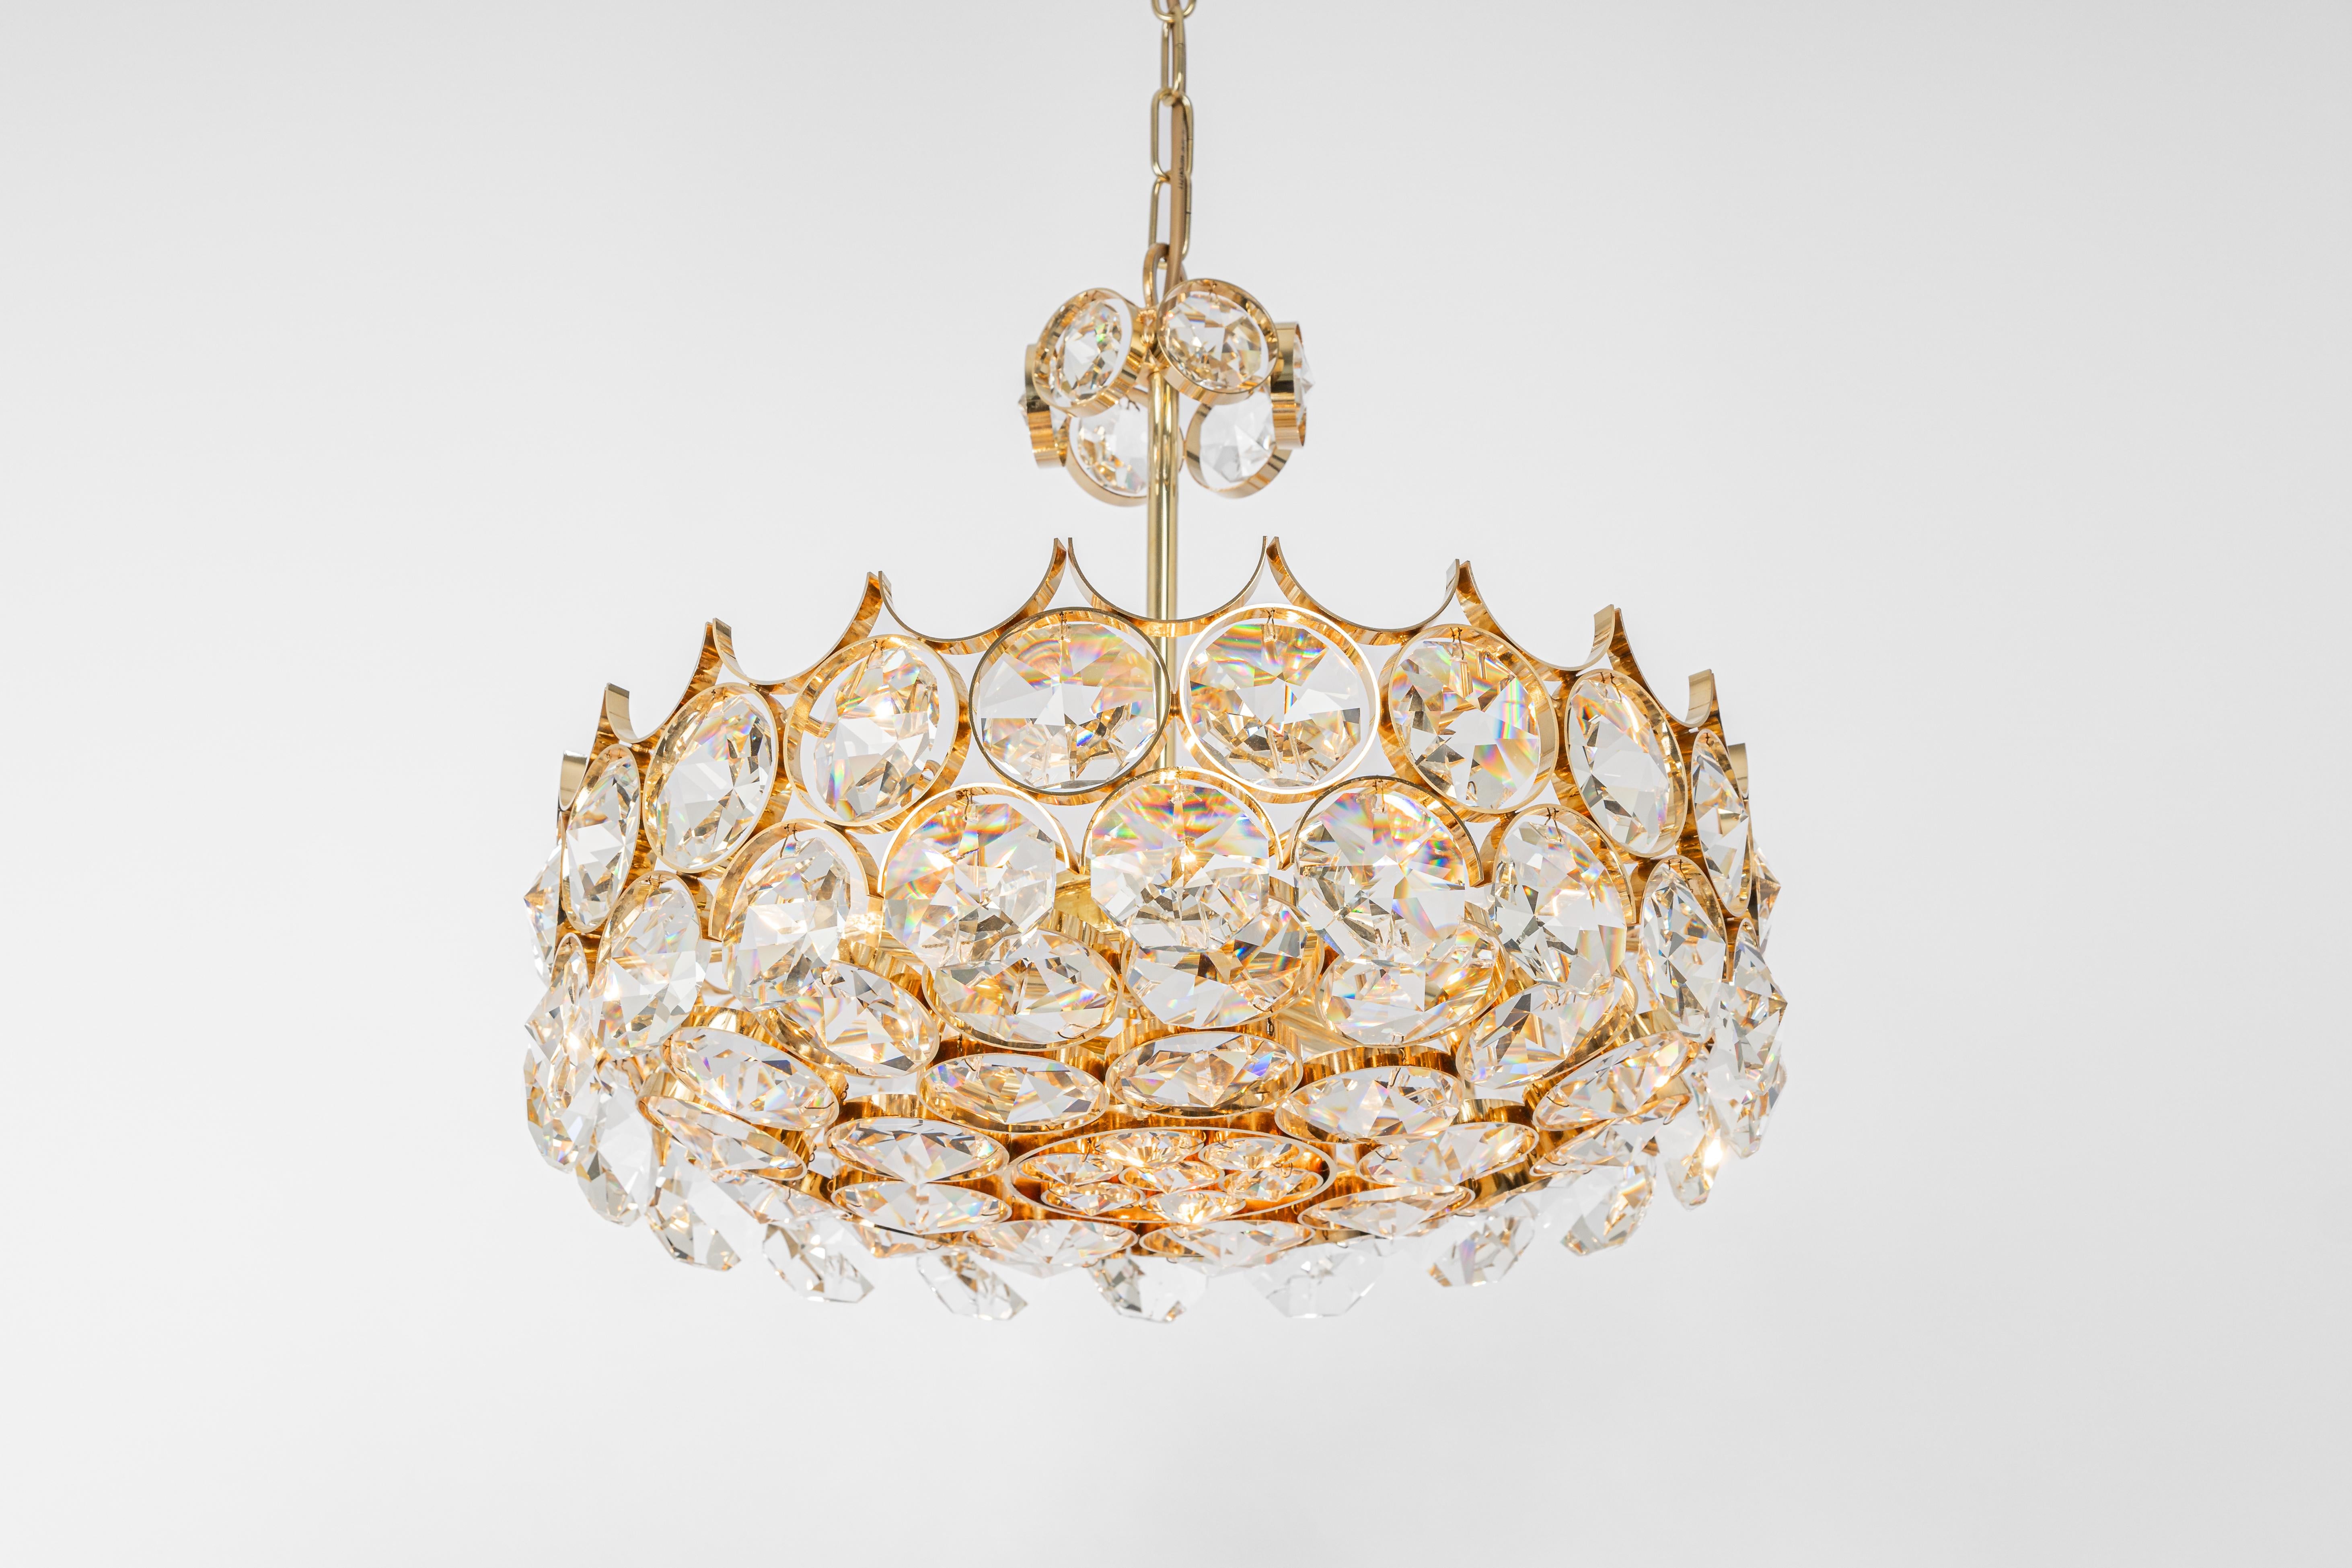 1 of 4 Large Gilt Brass Chandelier, Sciolari Design by Palwa, Germany, 1970s For Sale 2